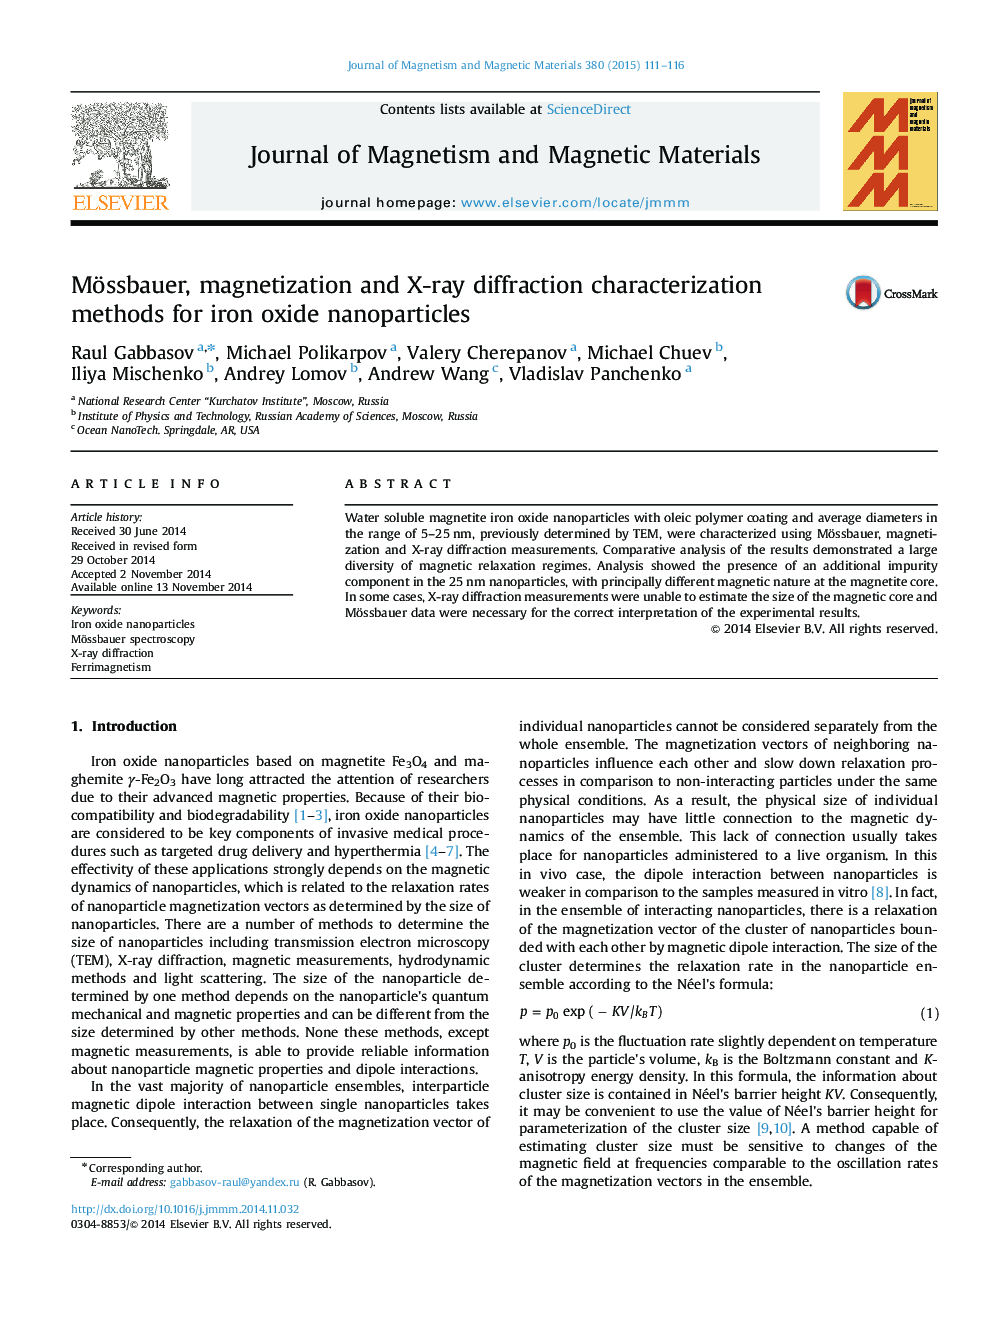 Mössbauer, magnetization and X-ray diffraction characterization methods for iron oxide nanoparticles